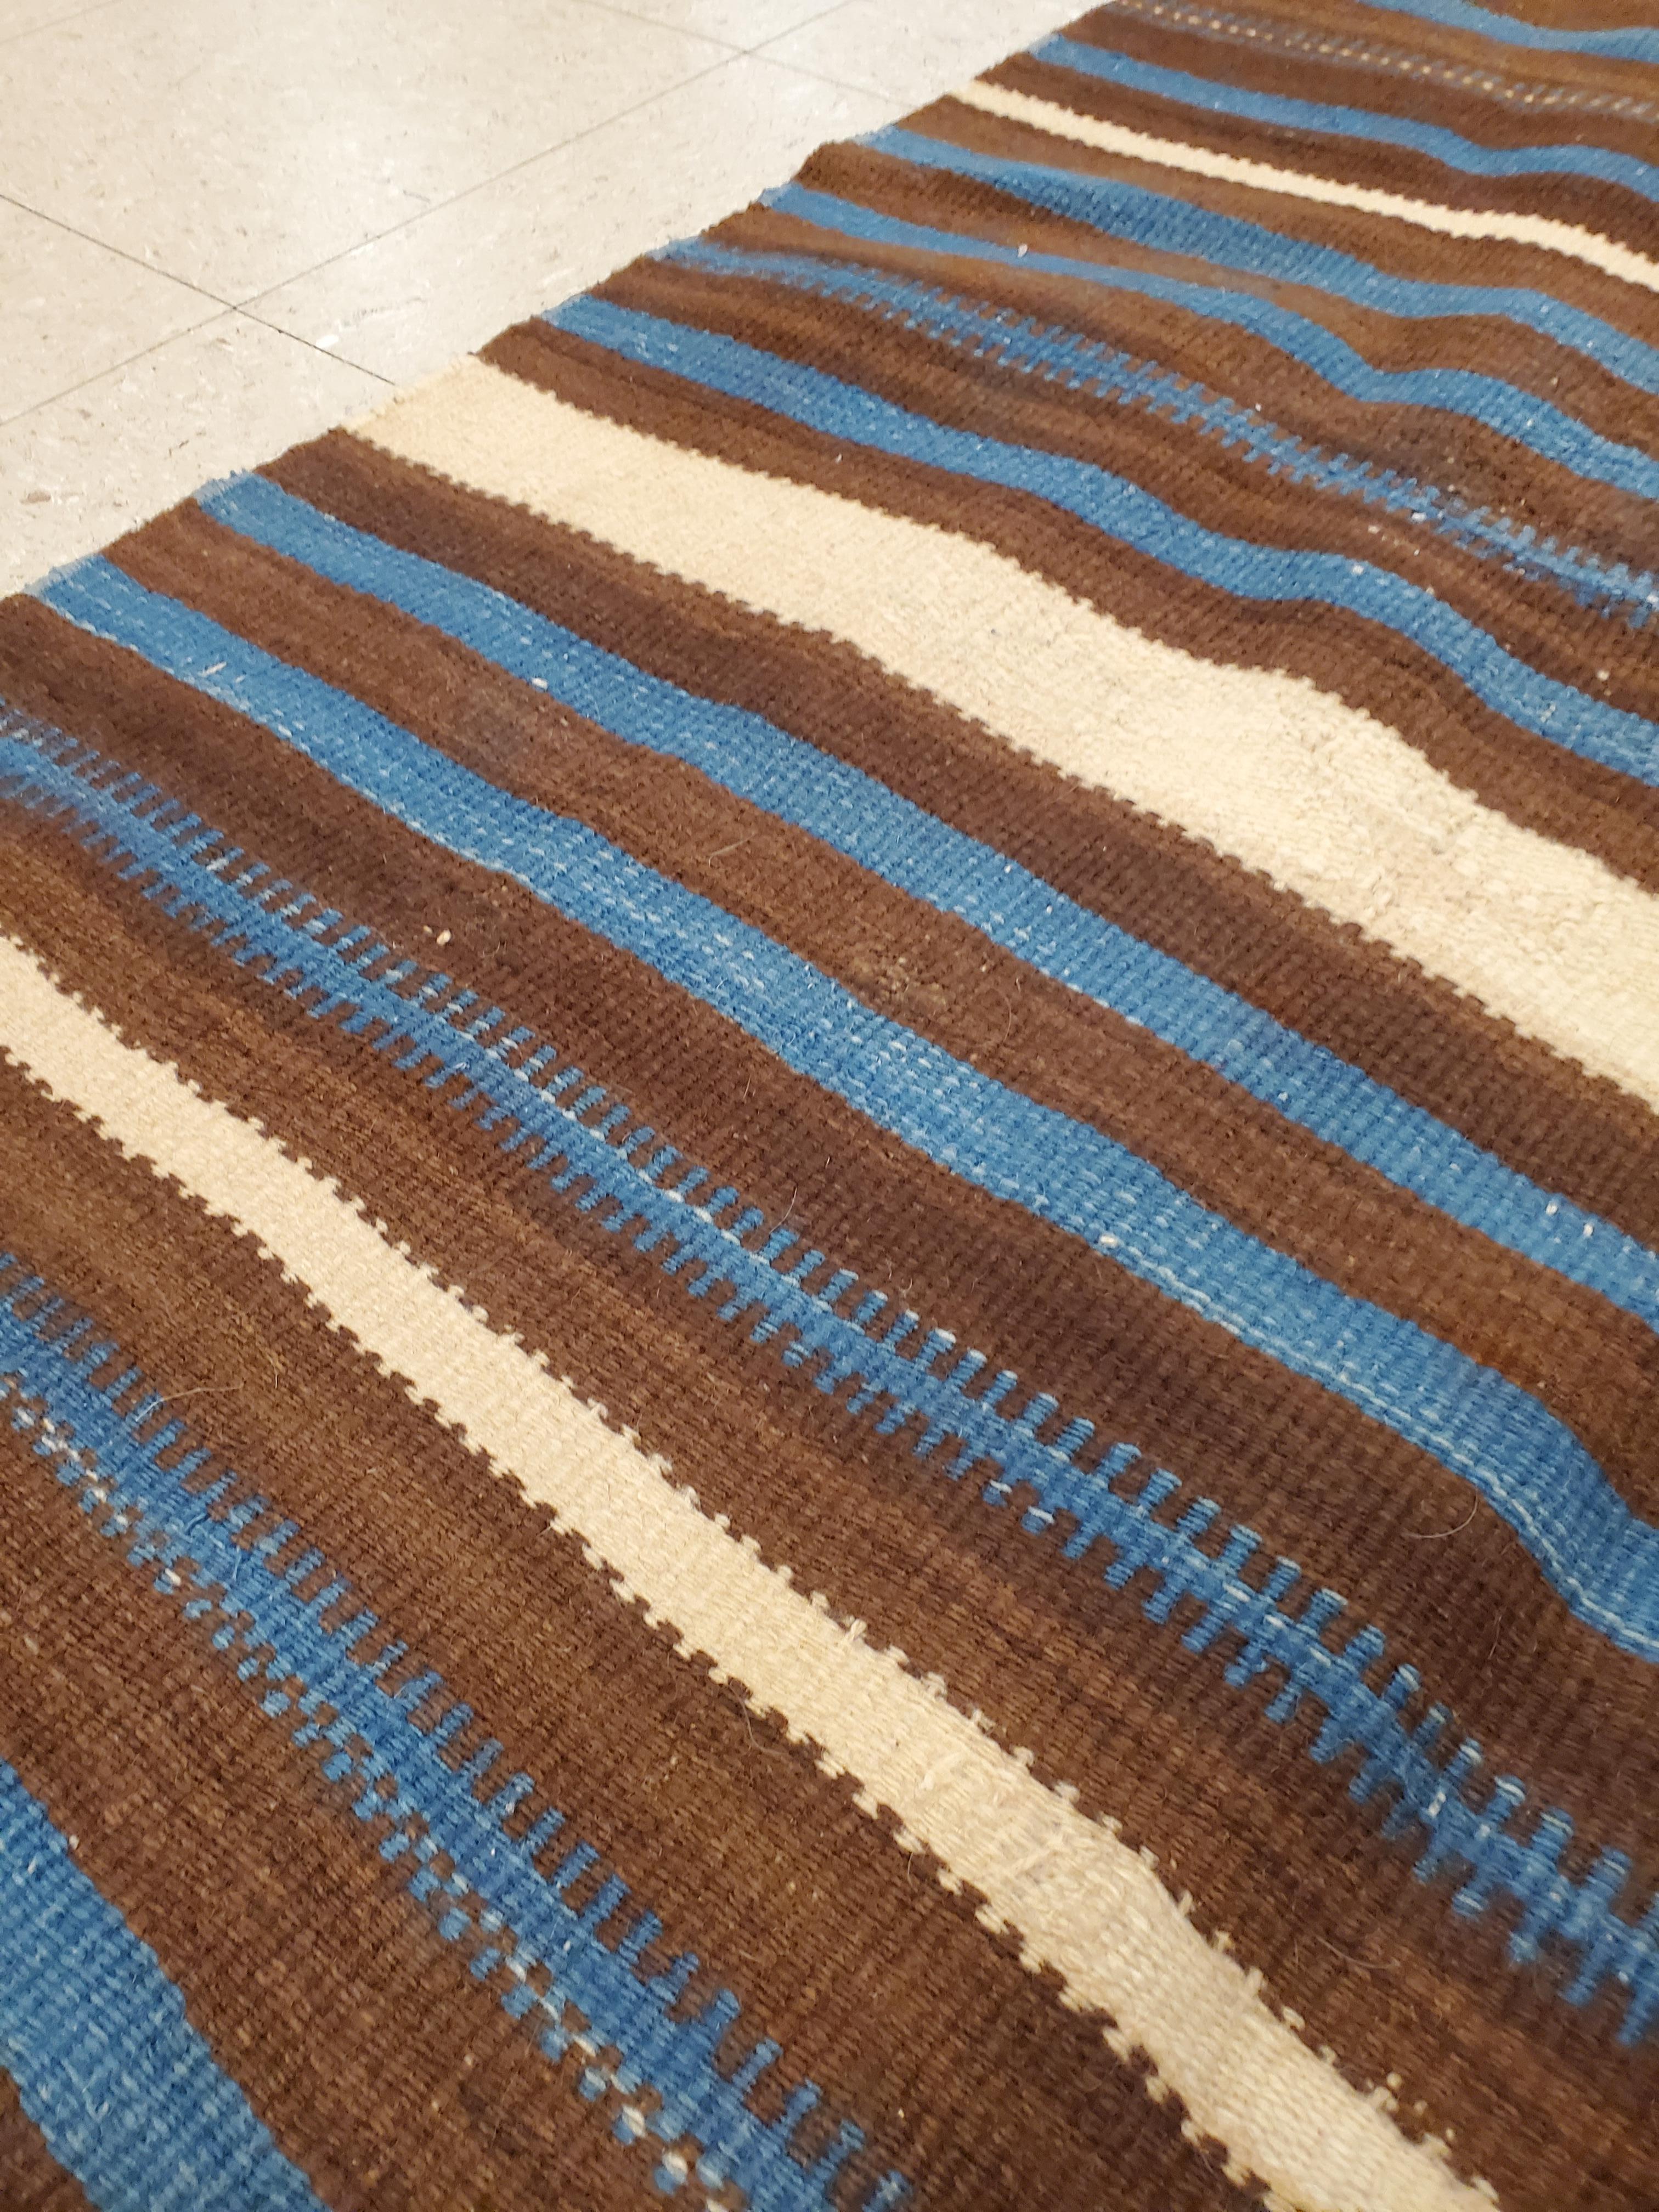 Antique Navajo Indian Rio Grande Blanket, Handmade Rug, Folk Art, Blue In Good Condition For Sale In New York, NY